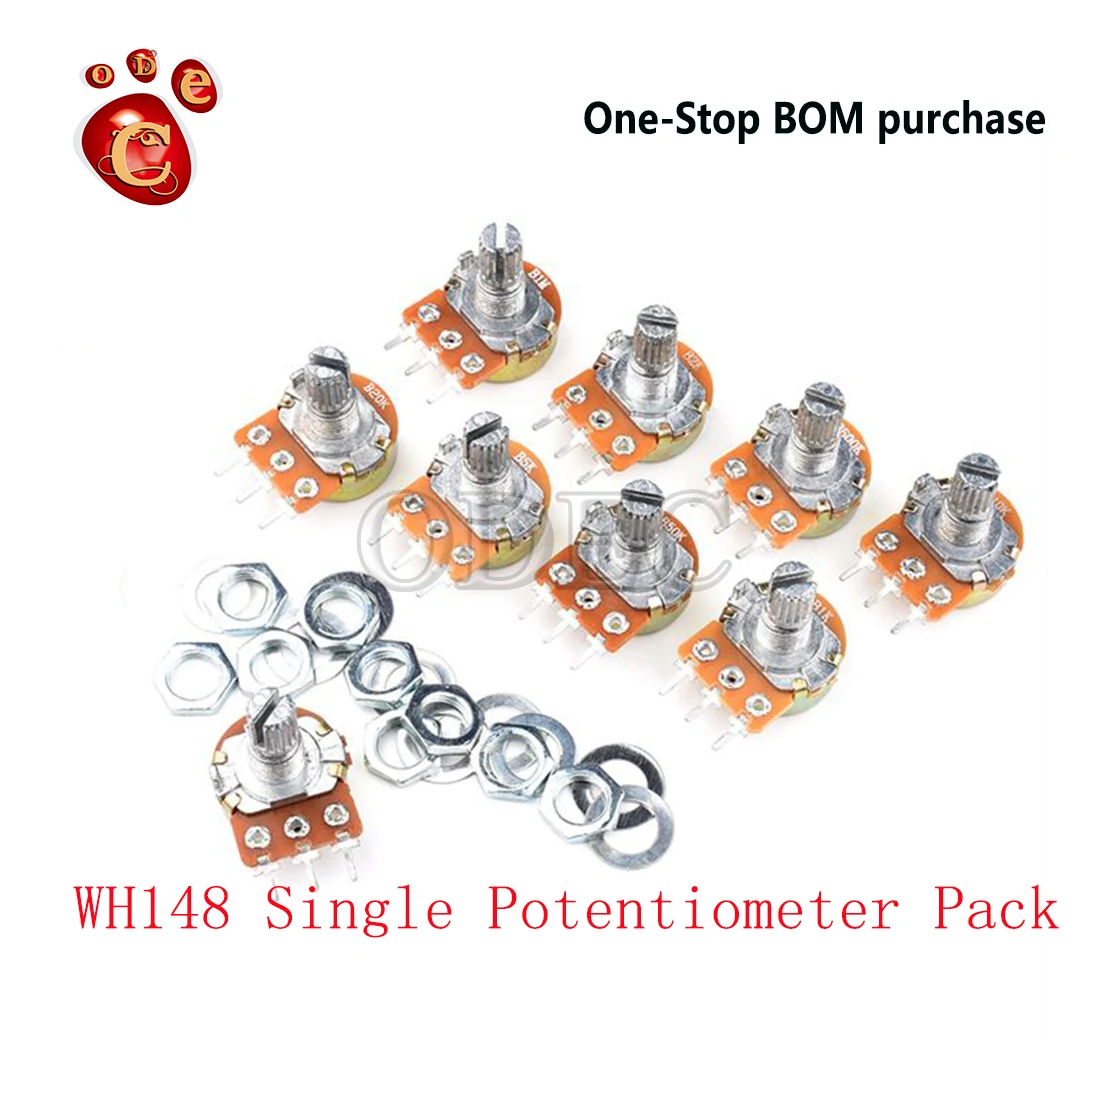 WH148 Single Potentiometer Pack Element Pack 9 Resistance Values B1/2/5/20/50K-1M 3 Pin Handle Length 15MM